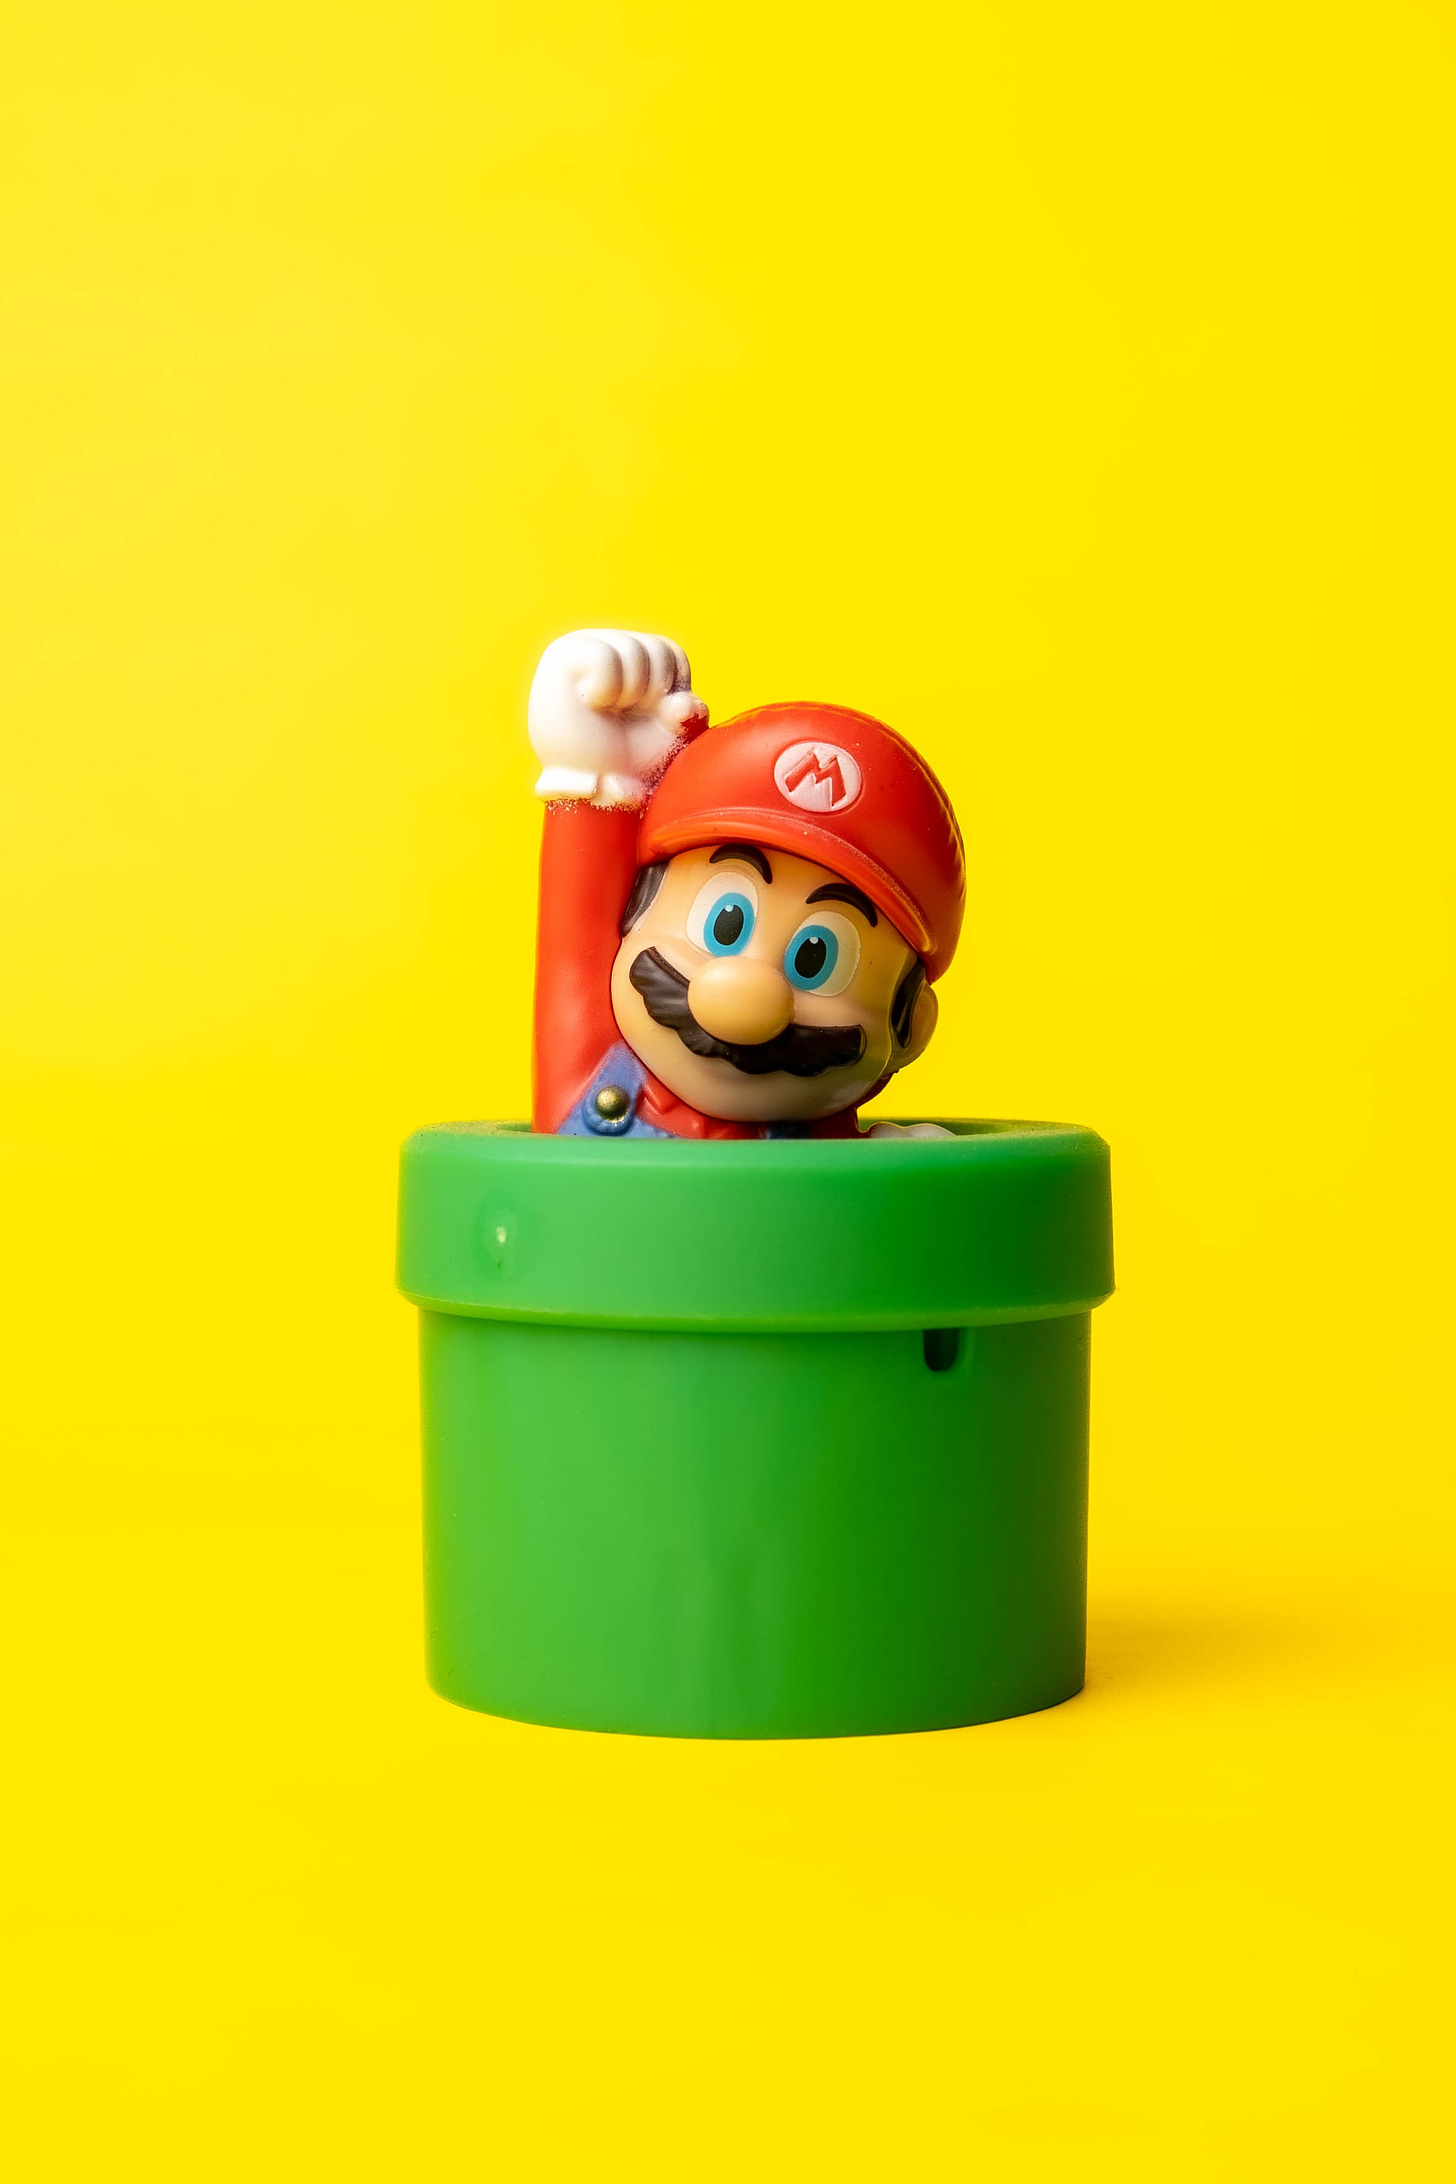 An image of Super Mario popping out of a pipe